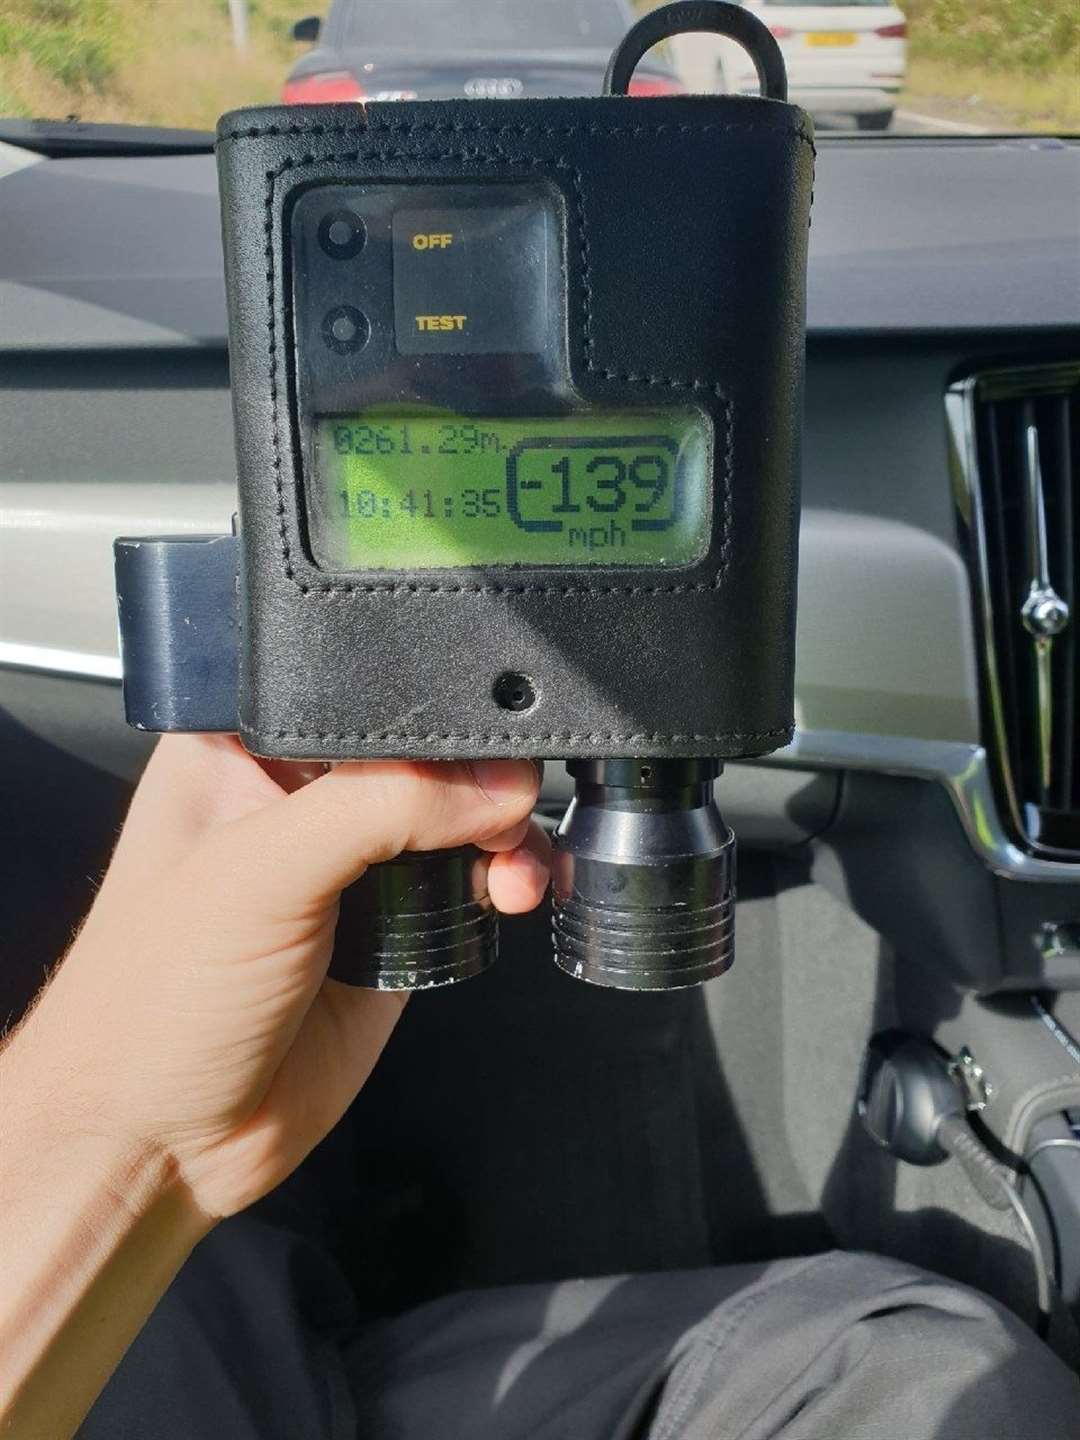 The driver was caught doing over 130mph